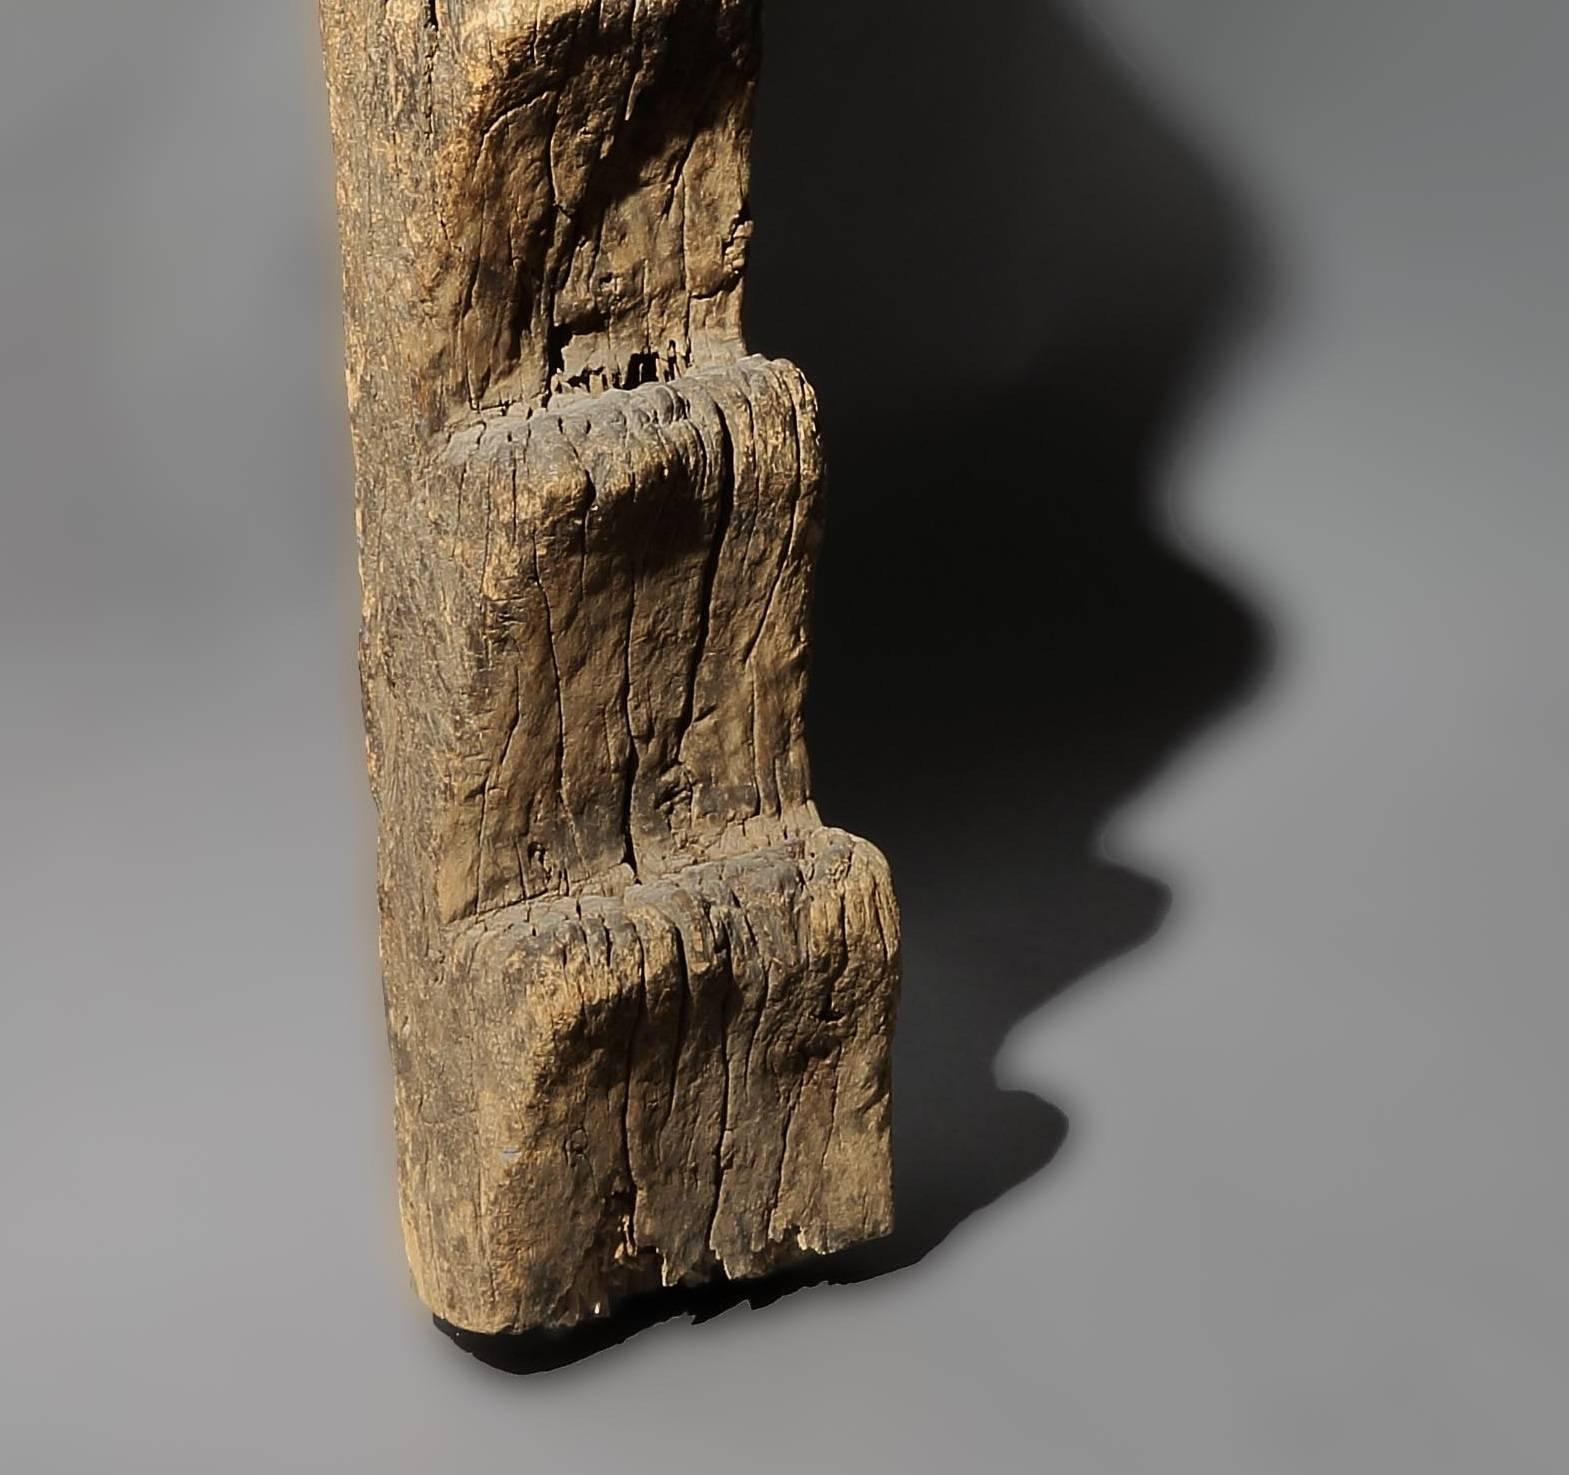 Made by people of the Dogon Tribe.
Fashioned from a naturally formed tree trunk.
Well patinated hardwood.
Mali, West Africa, circa 1890.
Measures: 96" high x 27" wide x 7" deep.
 